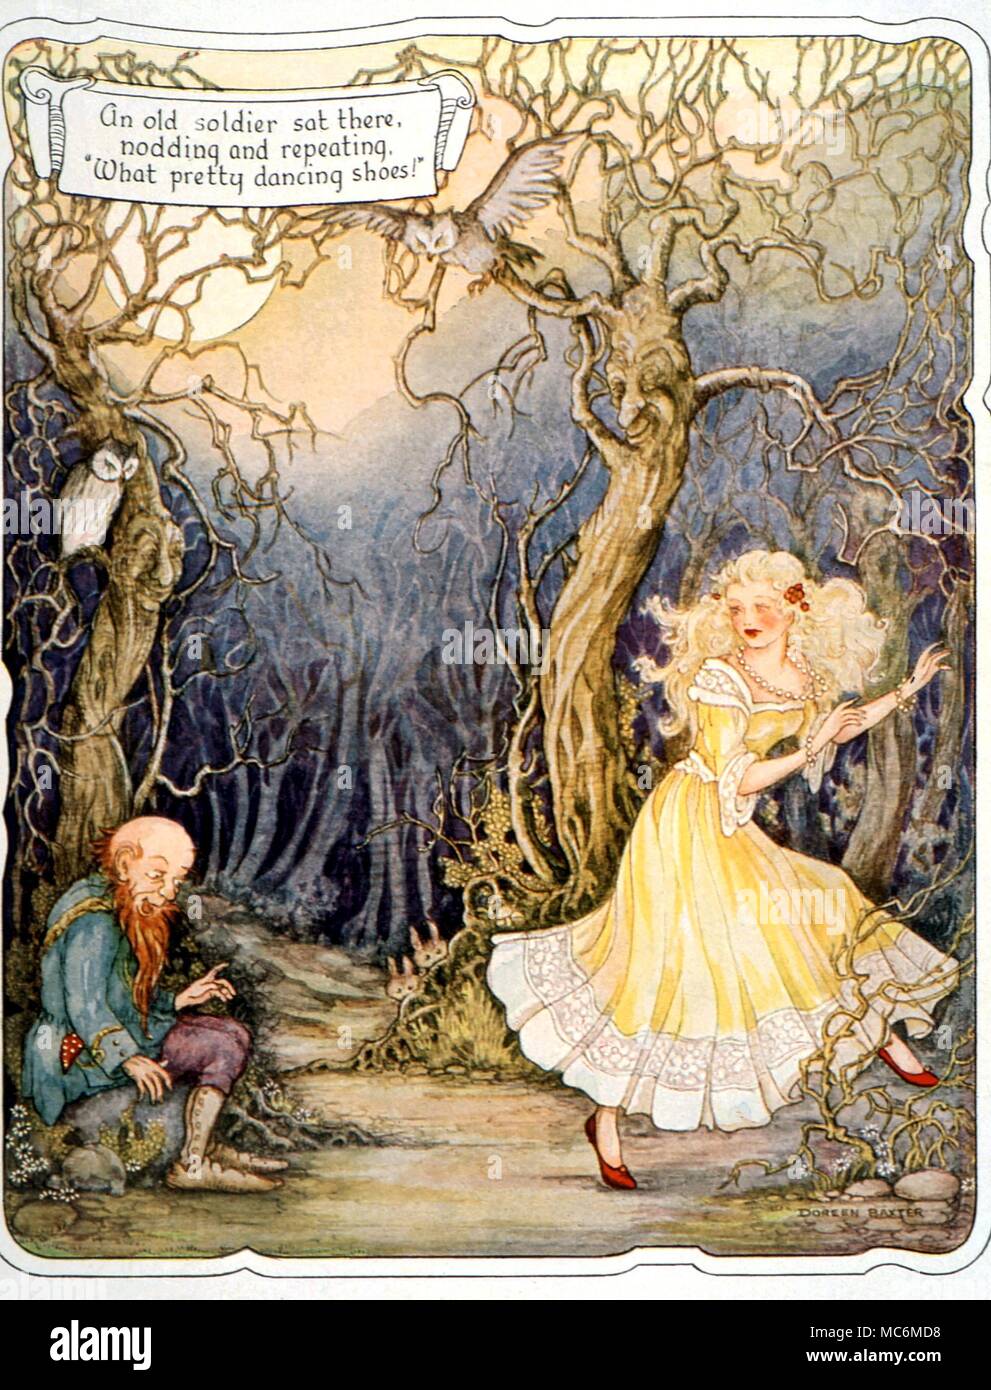 FAIRY TALES - THE RED SHOES. The Old Soldier admires the red shoes. Illustration by Doren Baxter. From The Fairy-Tale Omnibus, c. 1949 Stock Photo